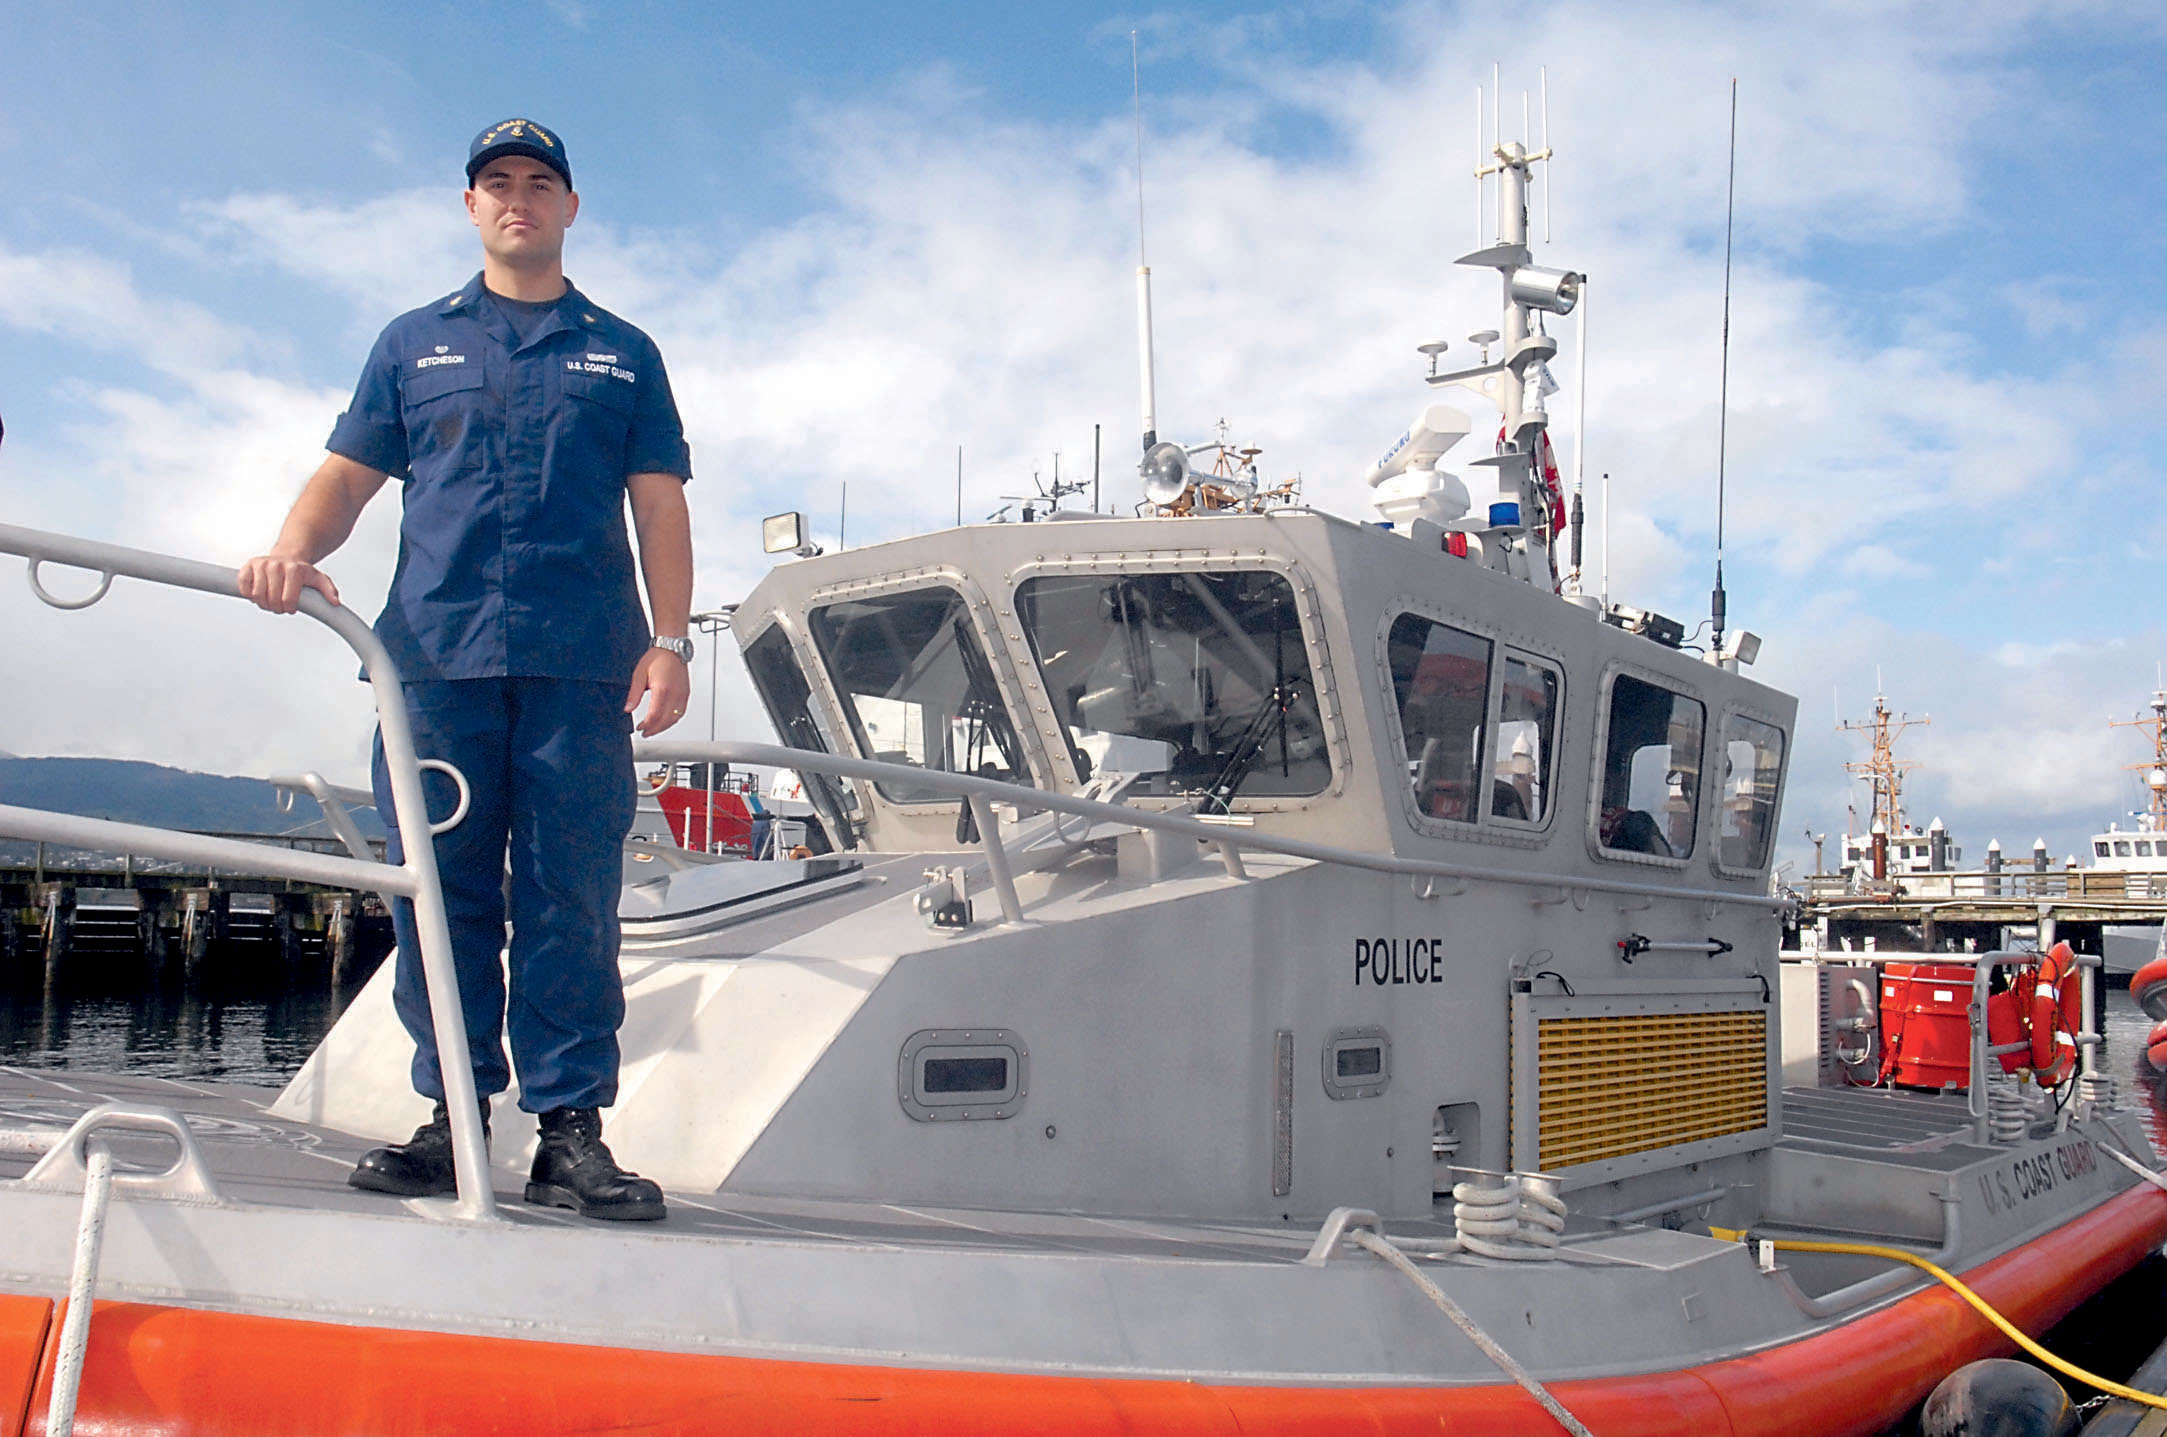 Coast Guard Boatswain’s Mate Chief Petty Officer Philip Ketcheson stands on the bow of a patrol boat at U.S. Coast Guard Air Station/Sector Field Office Port Angeles. —Photo by Keith Thorpe/Peninsula Daily News ()